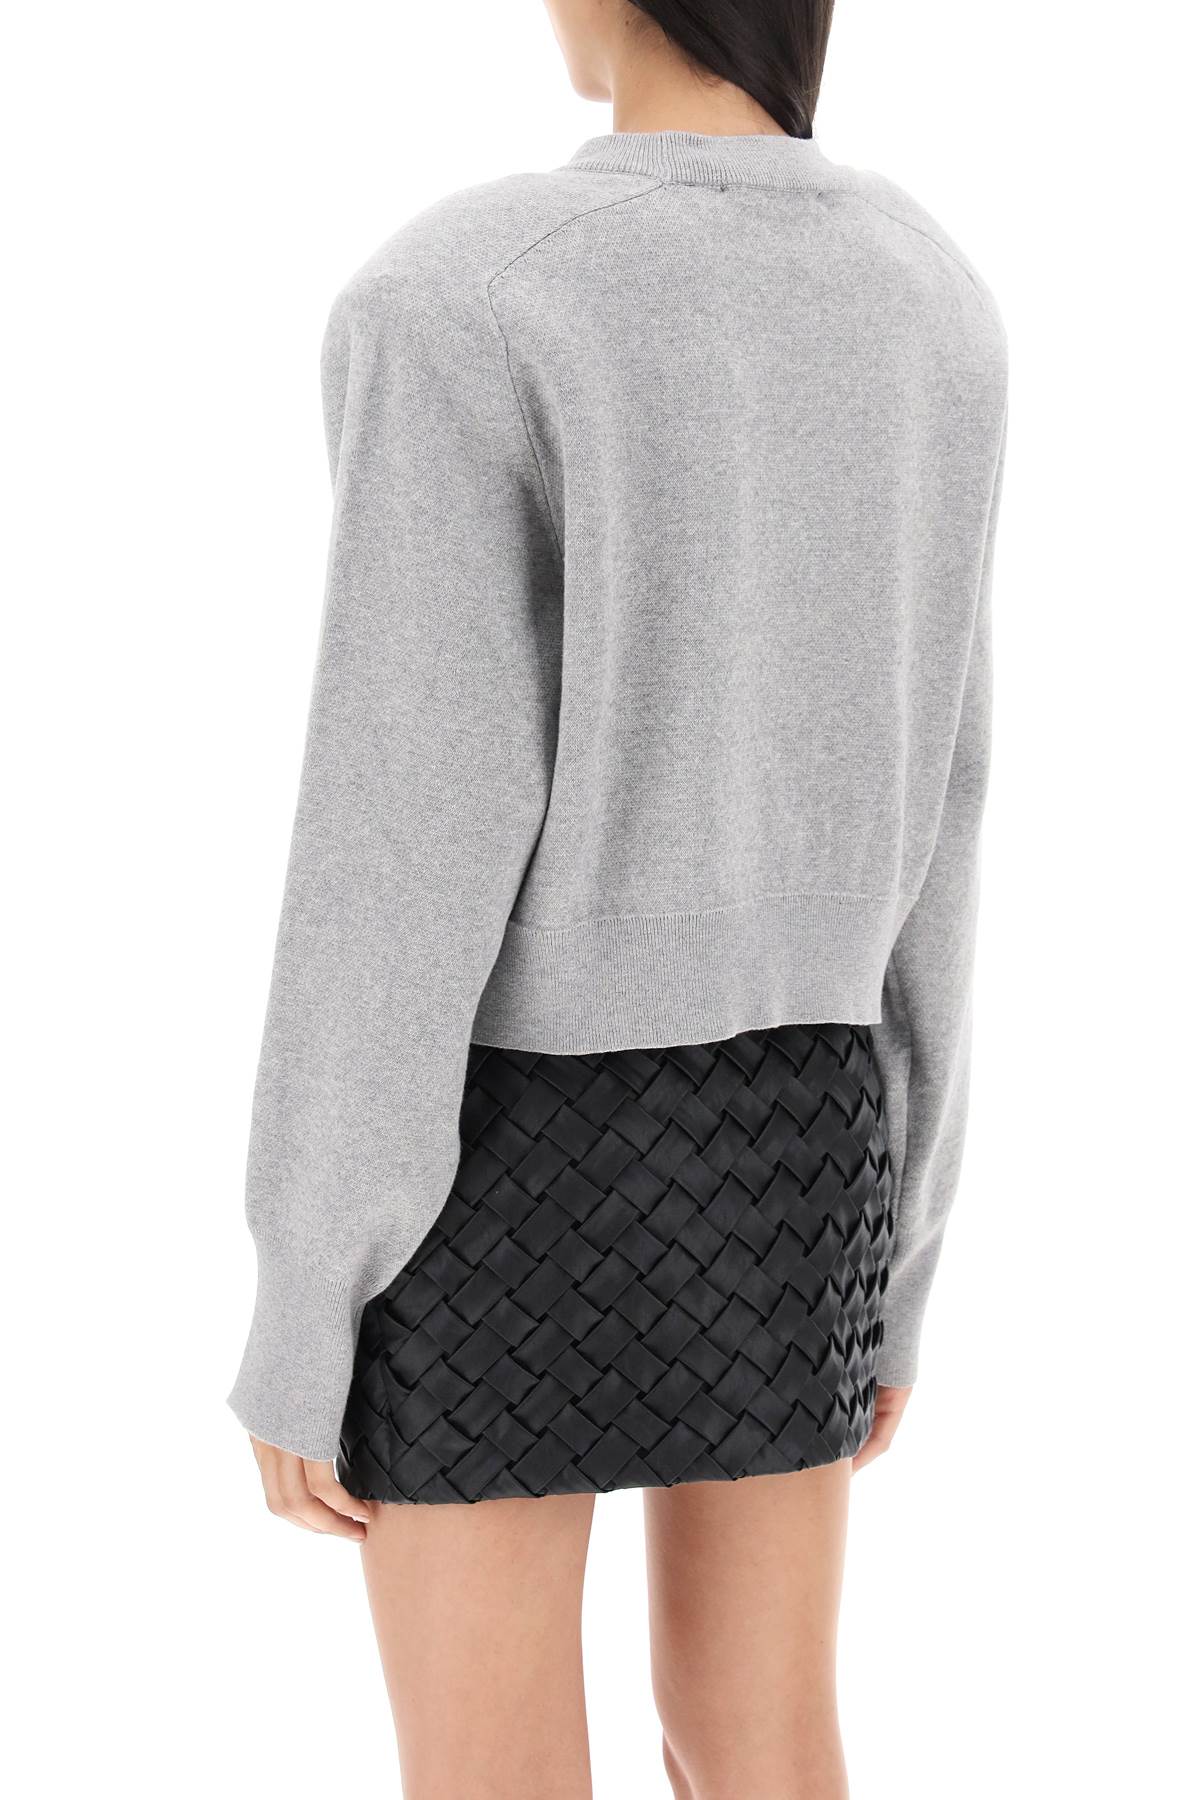 Shop Rotate Birger Christensen Cropped Sweater With Rhinestone Studded Logo In Grey